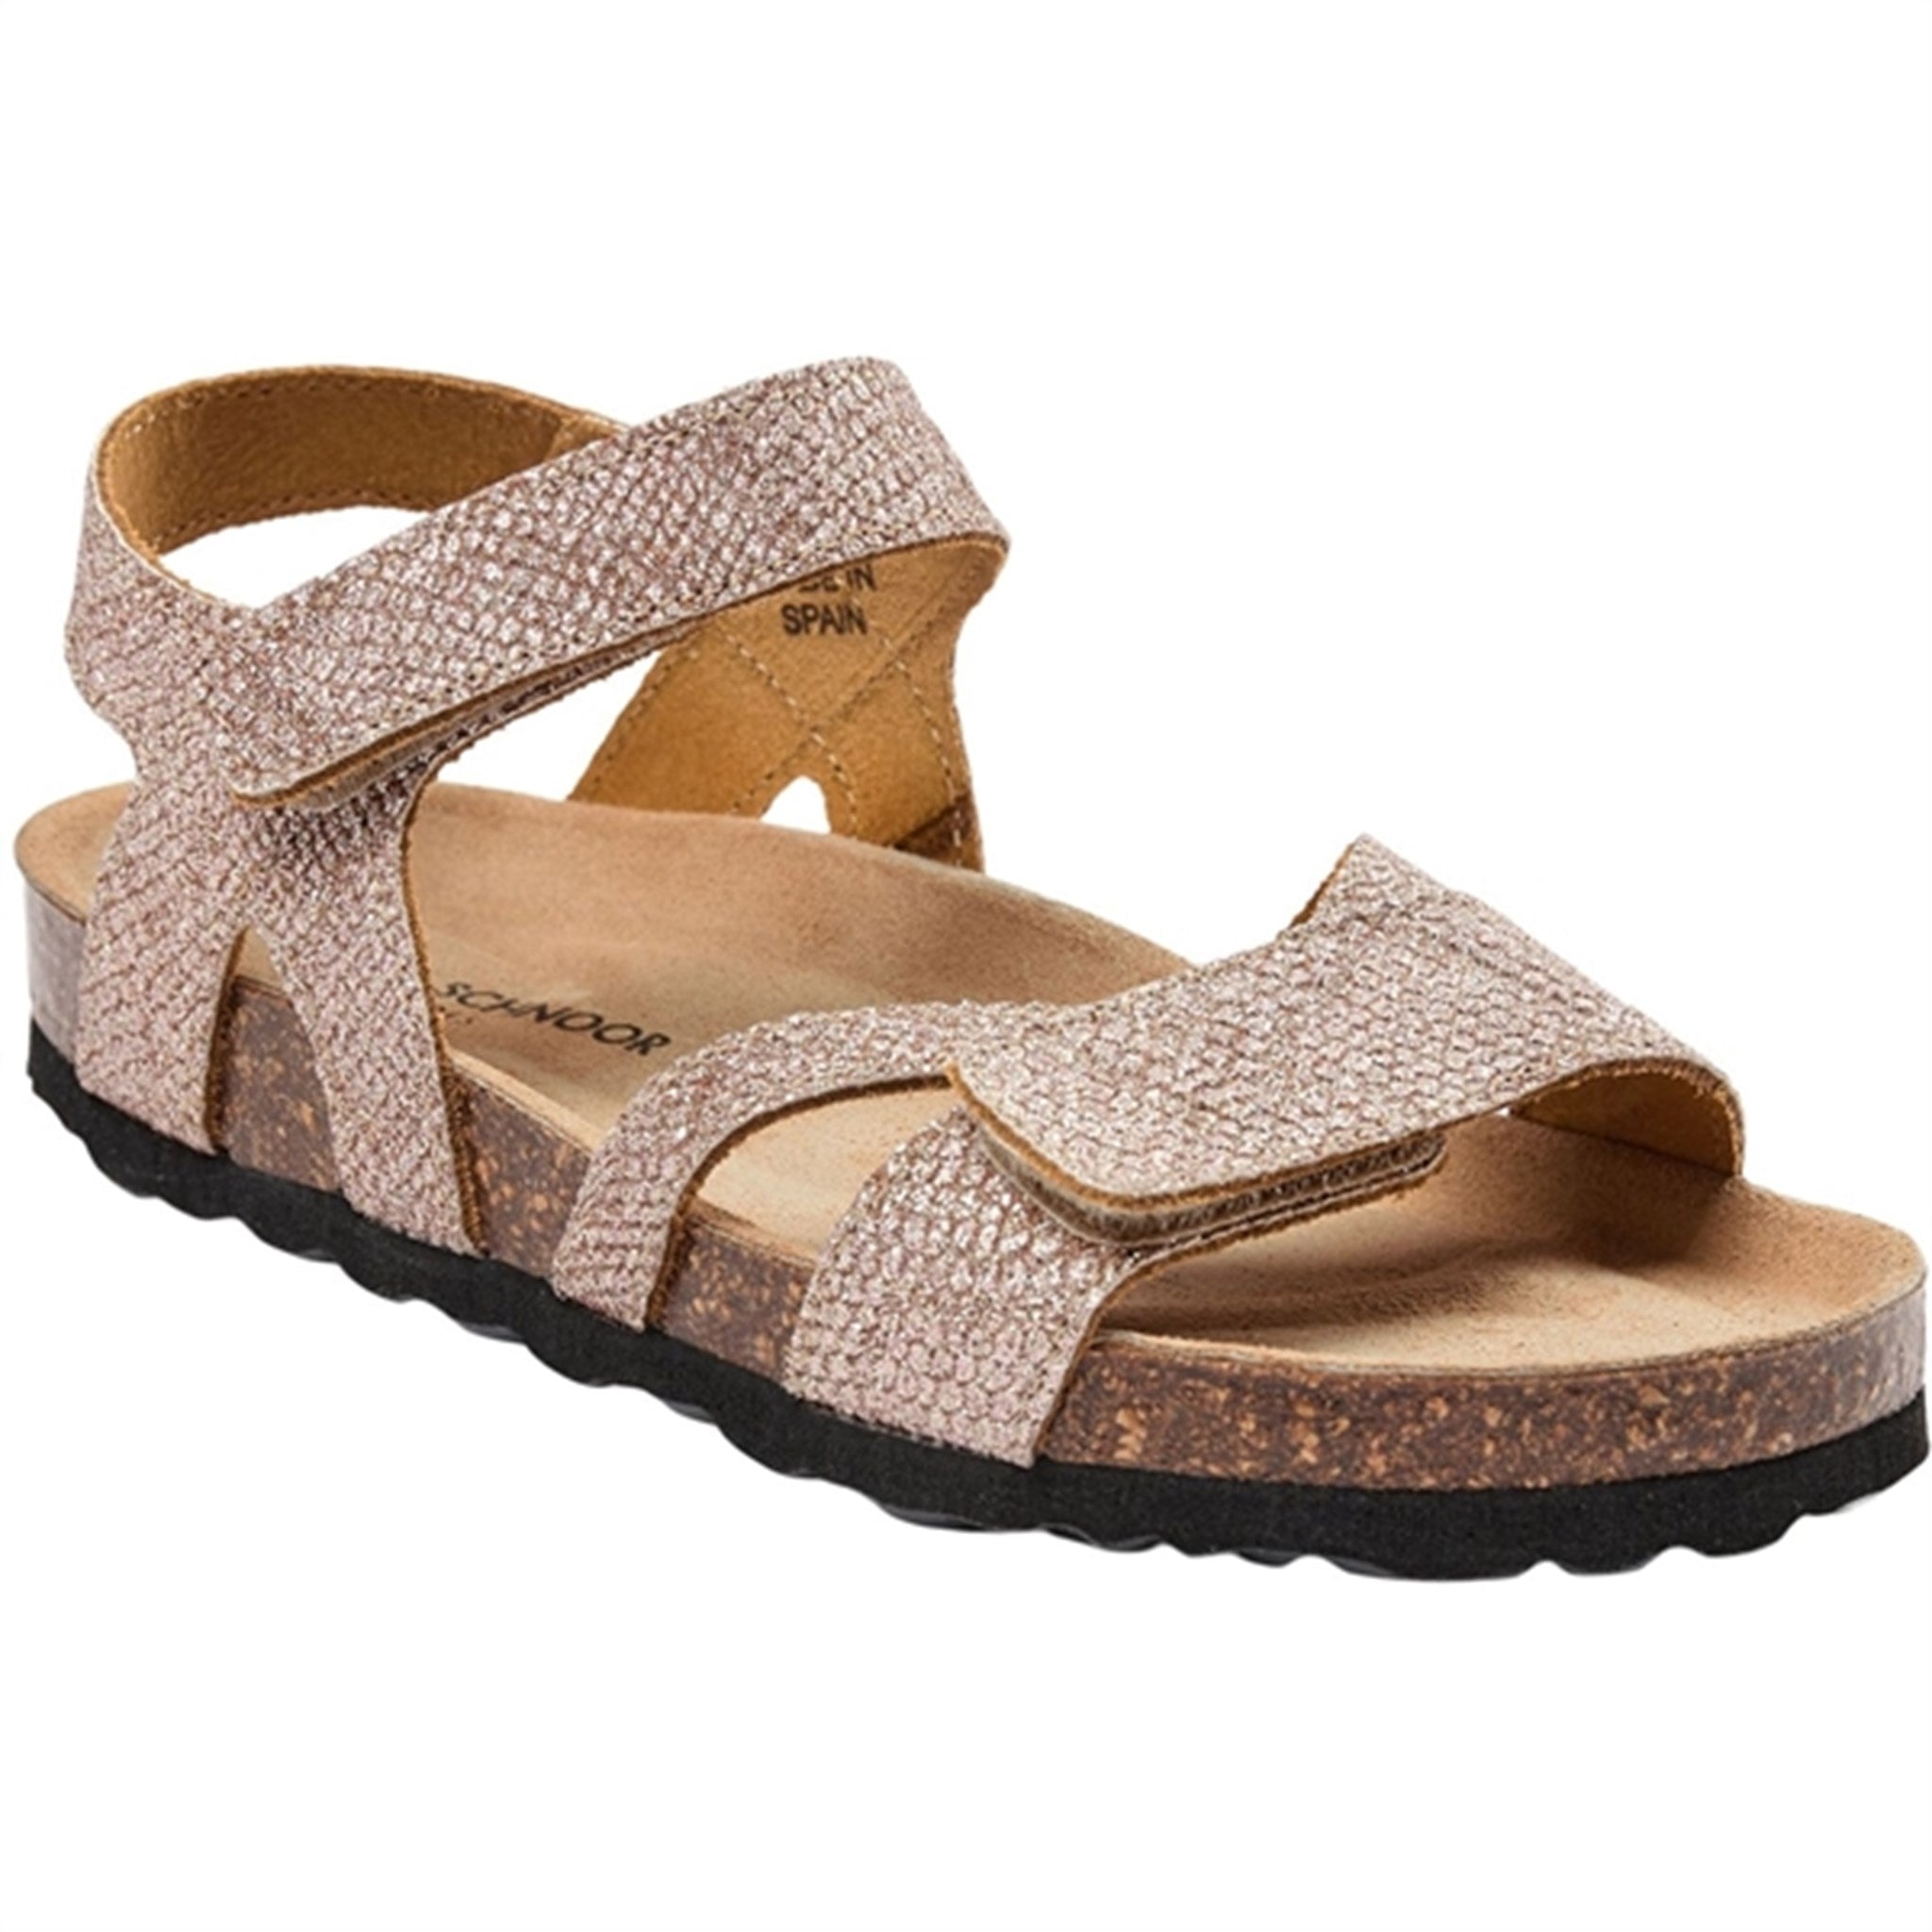 Sofie Schnoor Young Sandal Rose 6